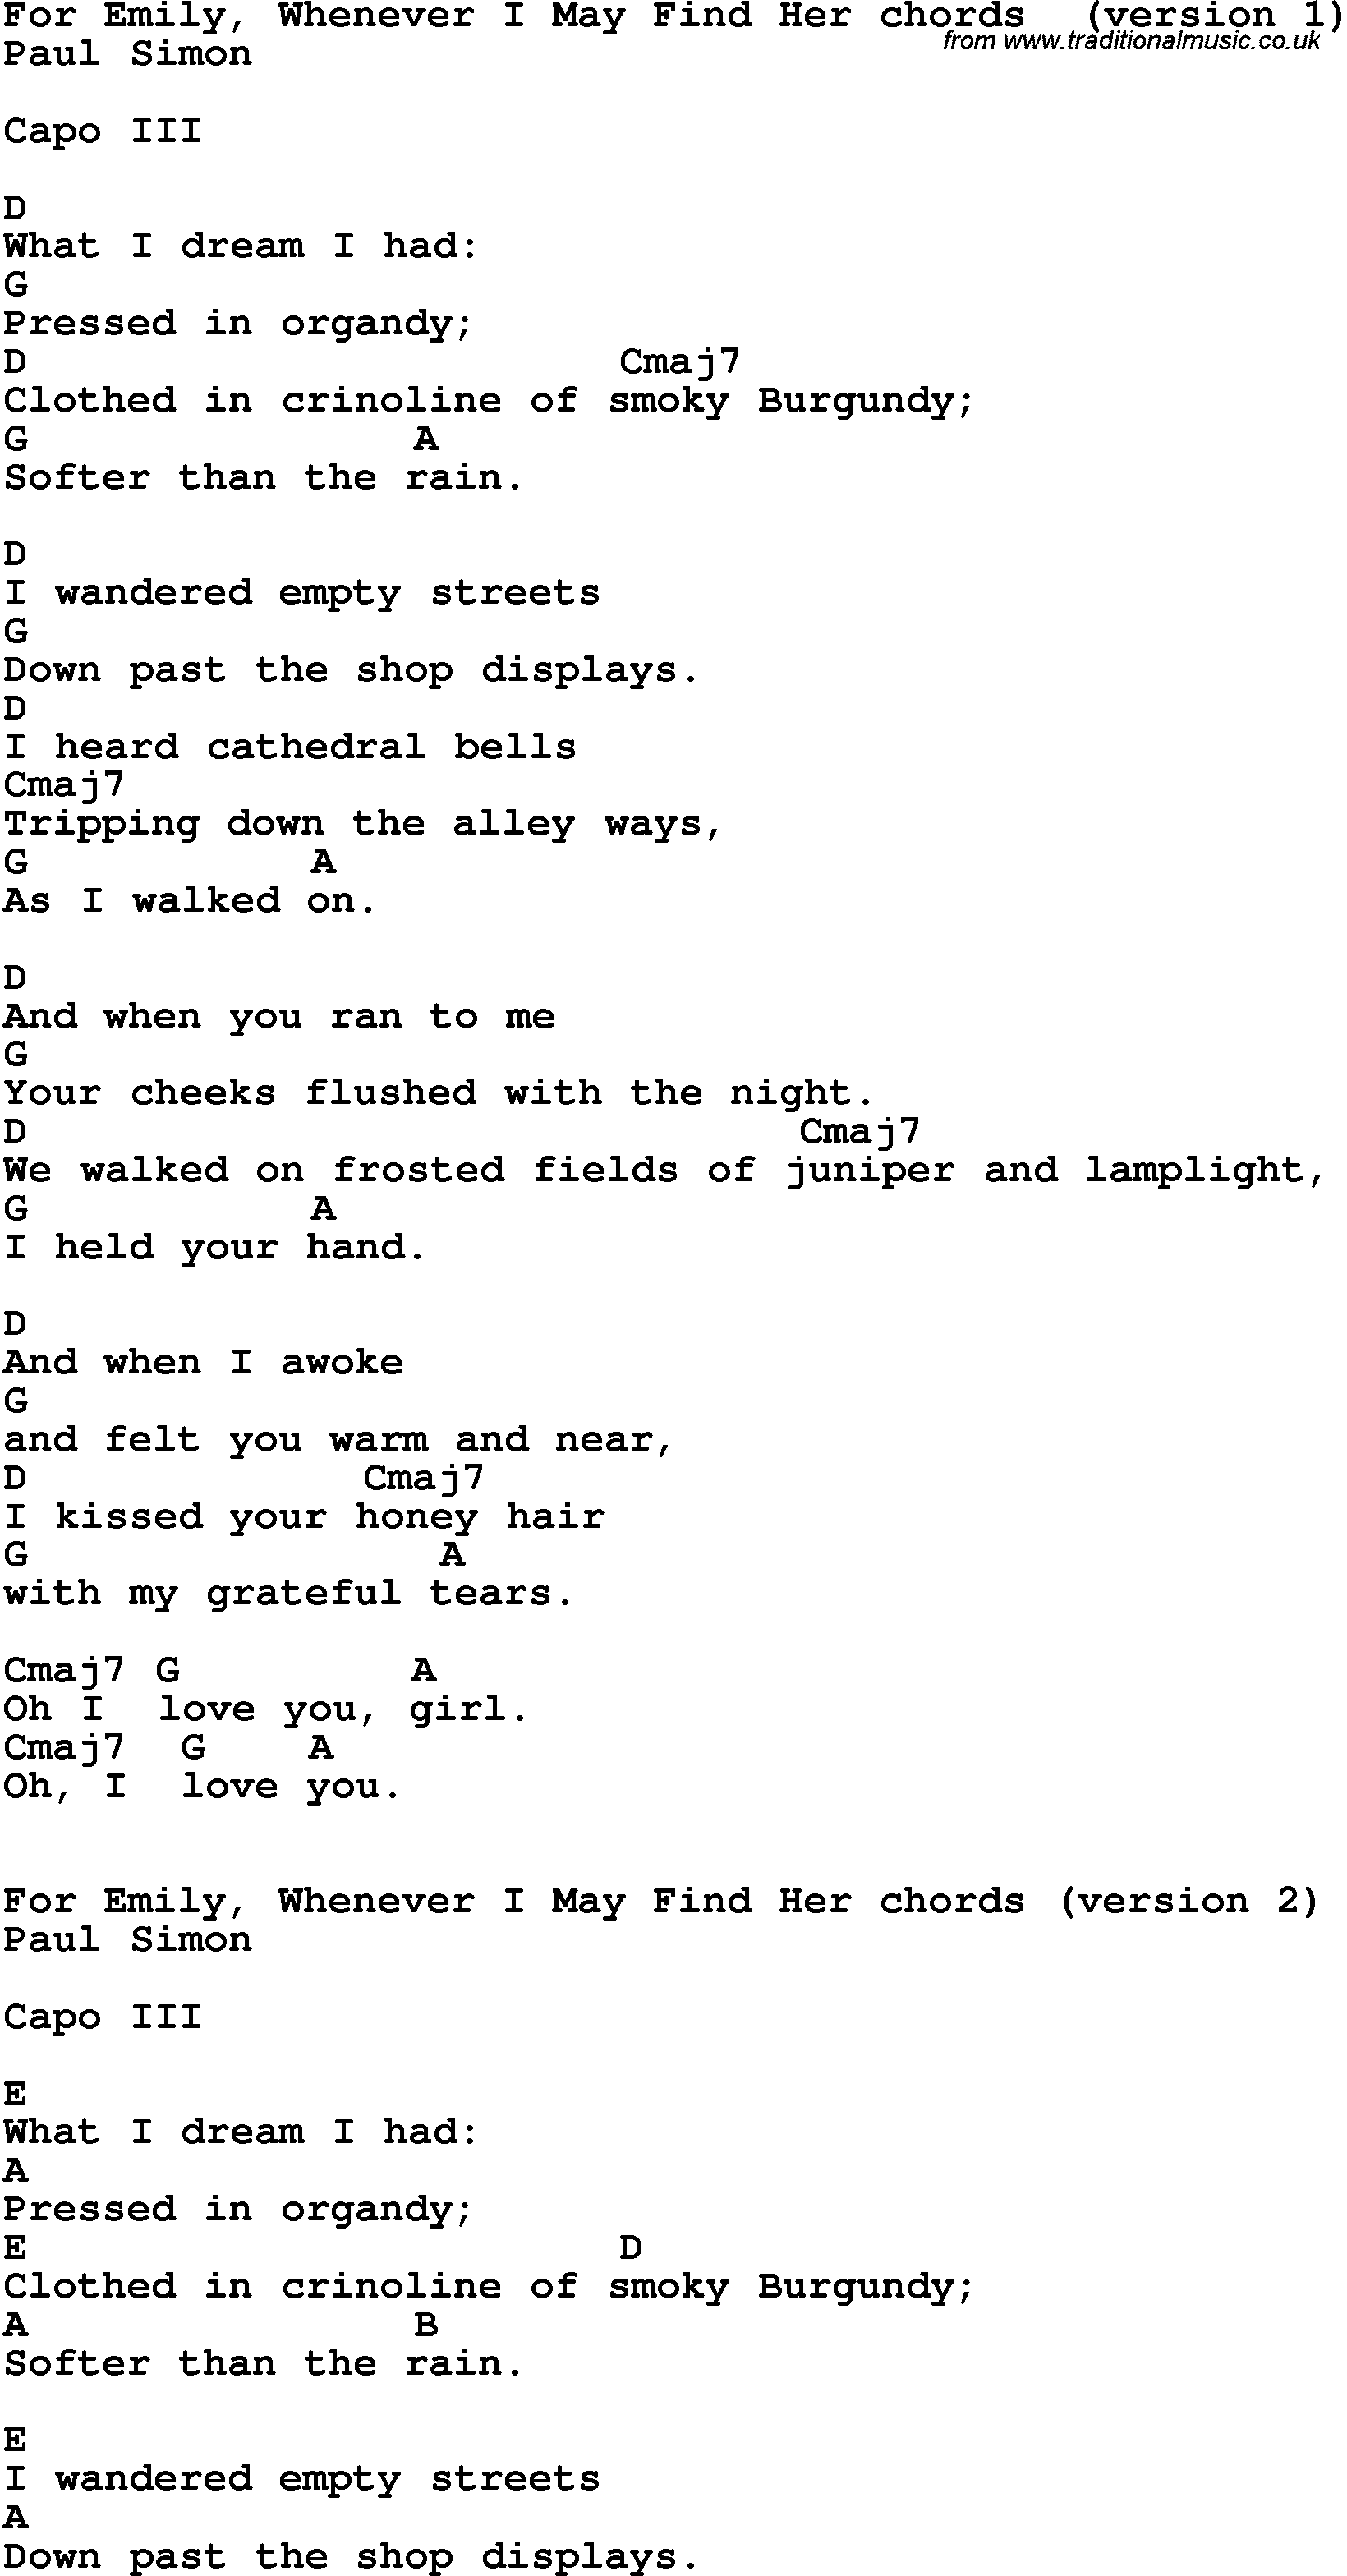 Song Lyrics with guitar chords for For Emily